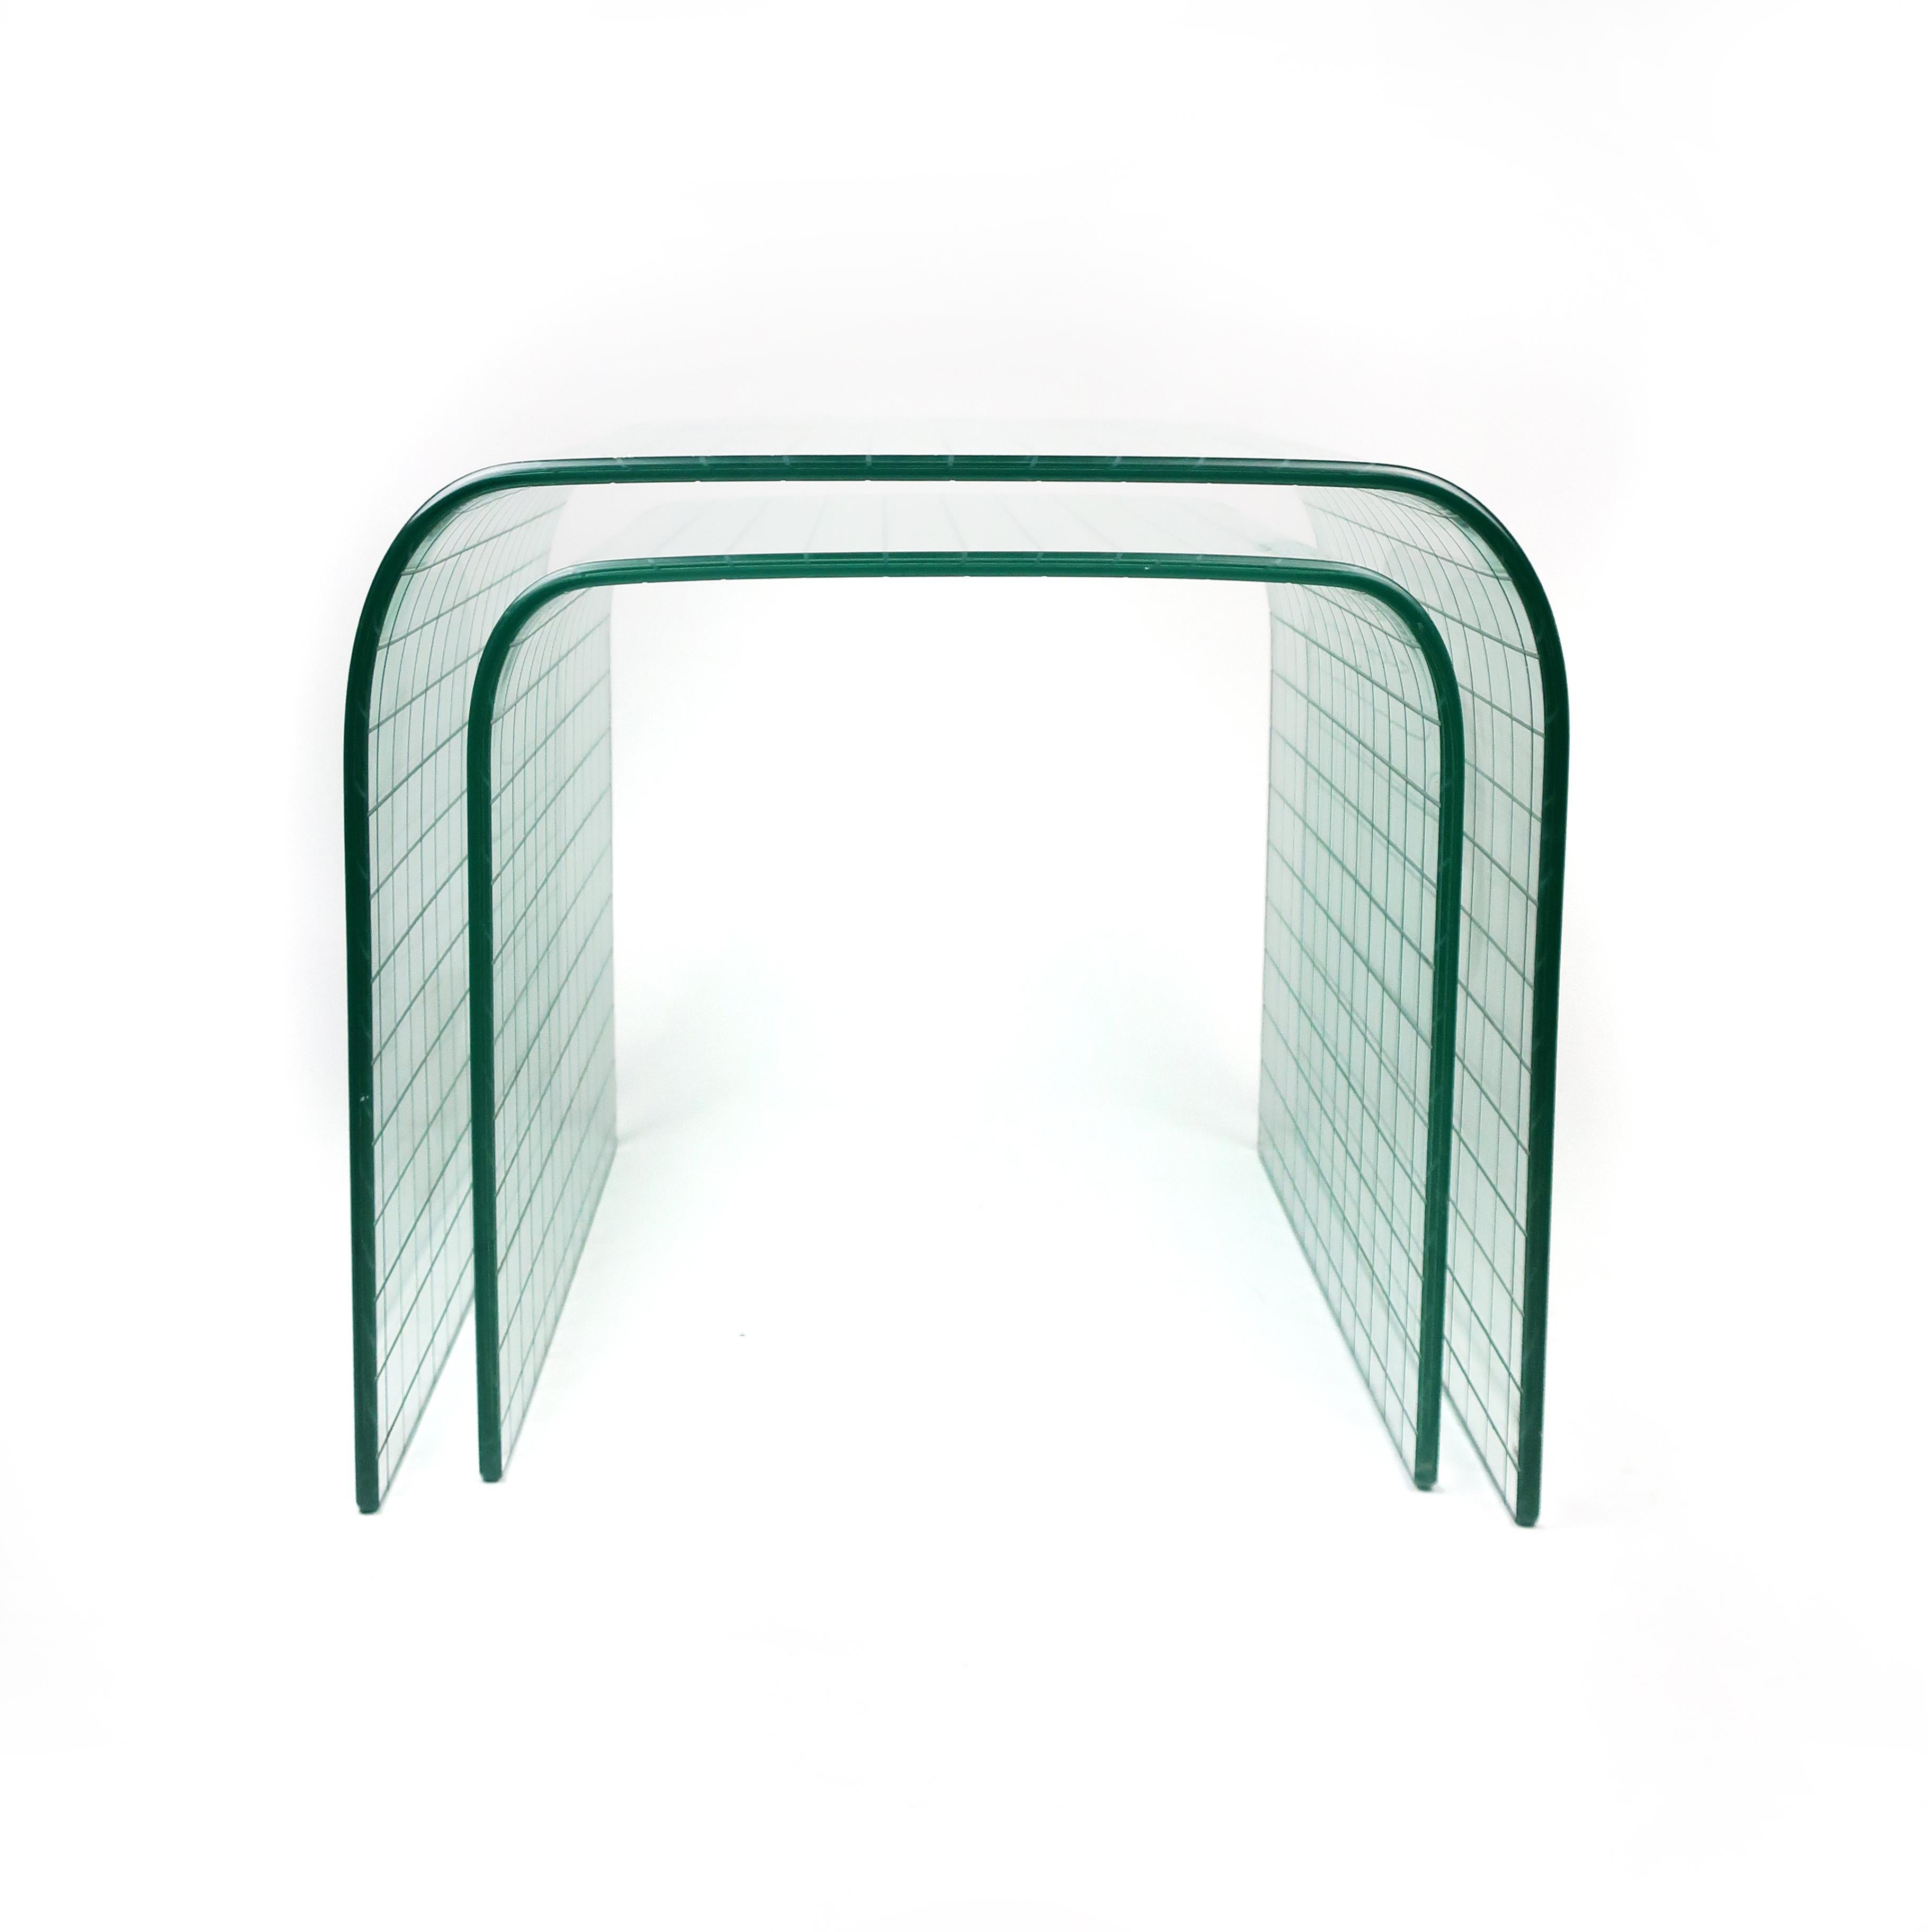 Post-Modern Pair of Etched Glass Waterfall Tables by Angelo Cortesi for FIAM